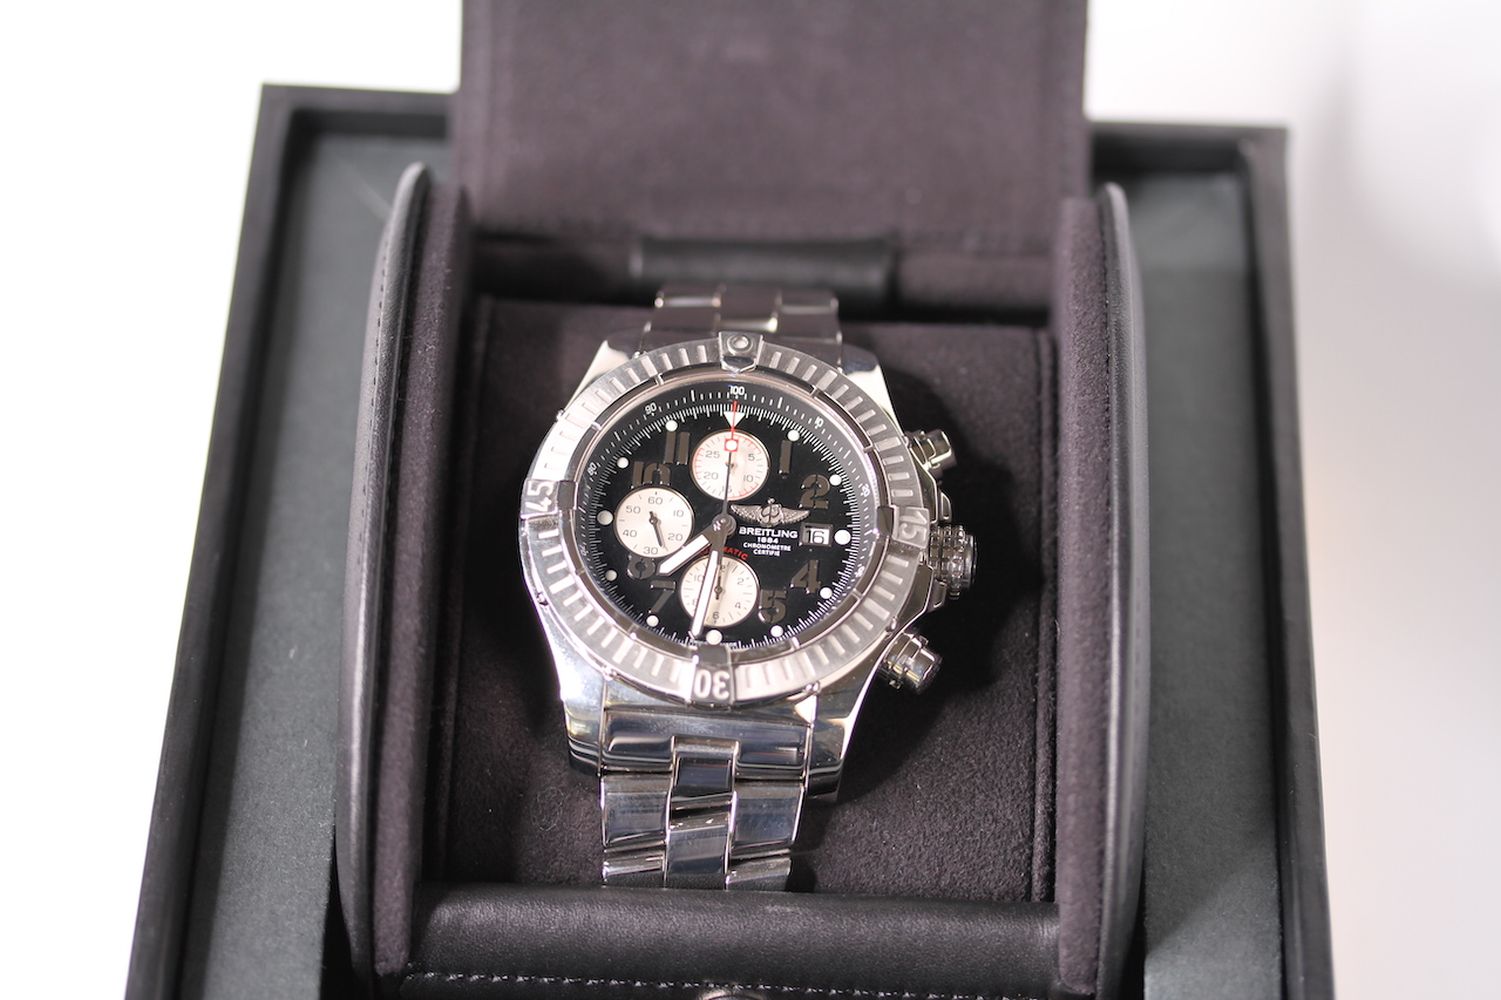 GENTLEMENS BREITLING SUPER AVENGER WRISTWATCH REF A13370 W/BOX & PAPERS, circular black dial with - Image 5 of 5